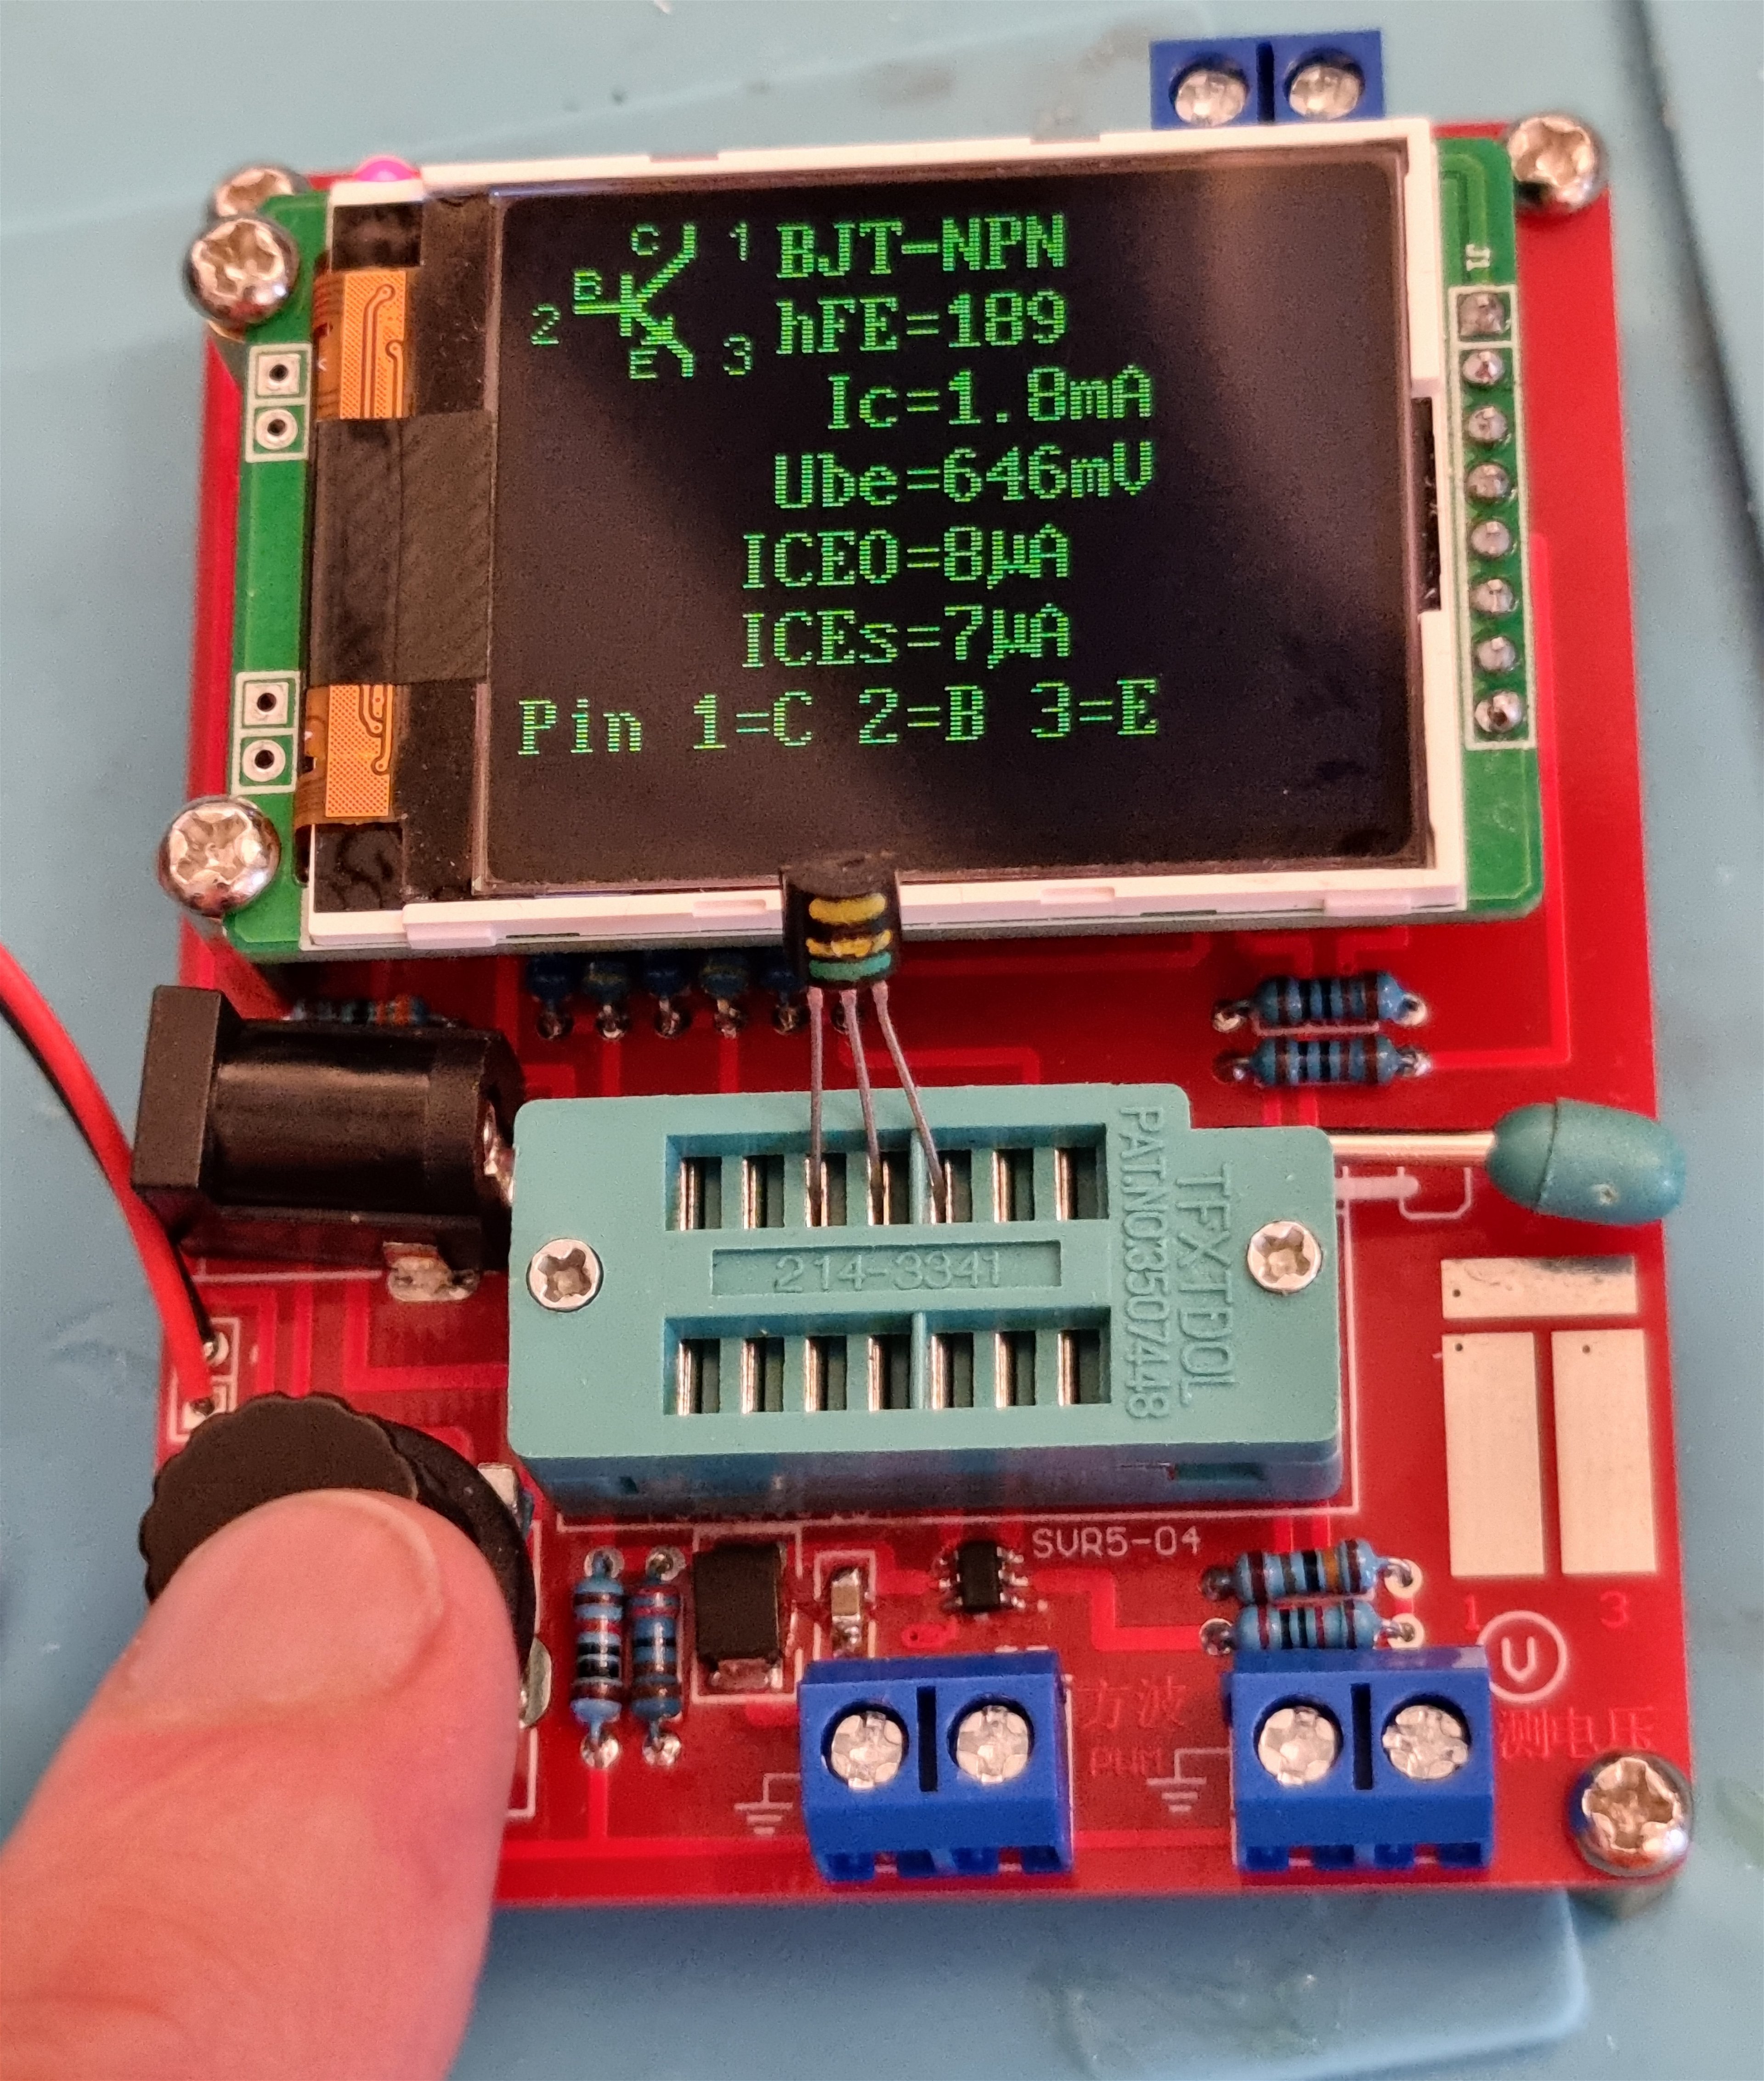 Soldering for Beginners: Build a Component Tester!